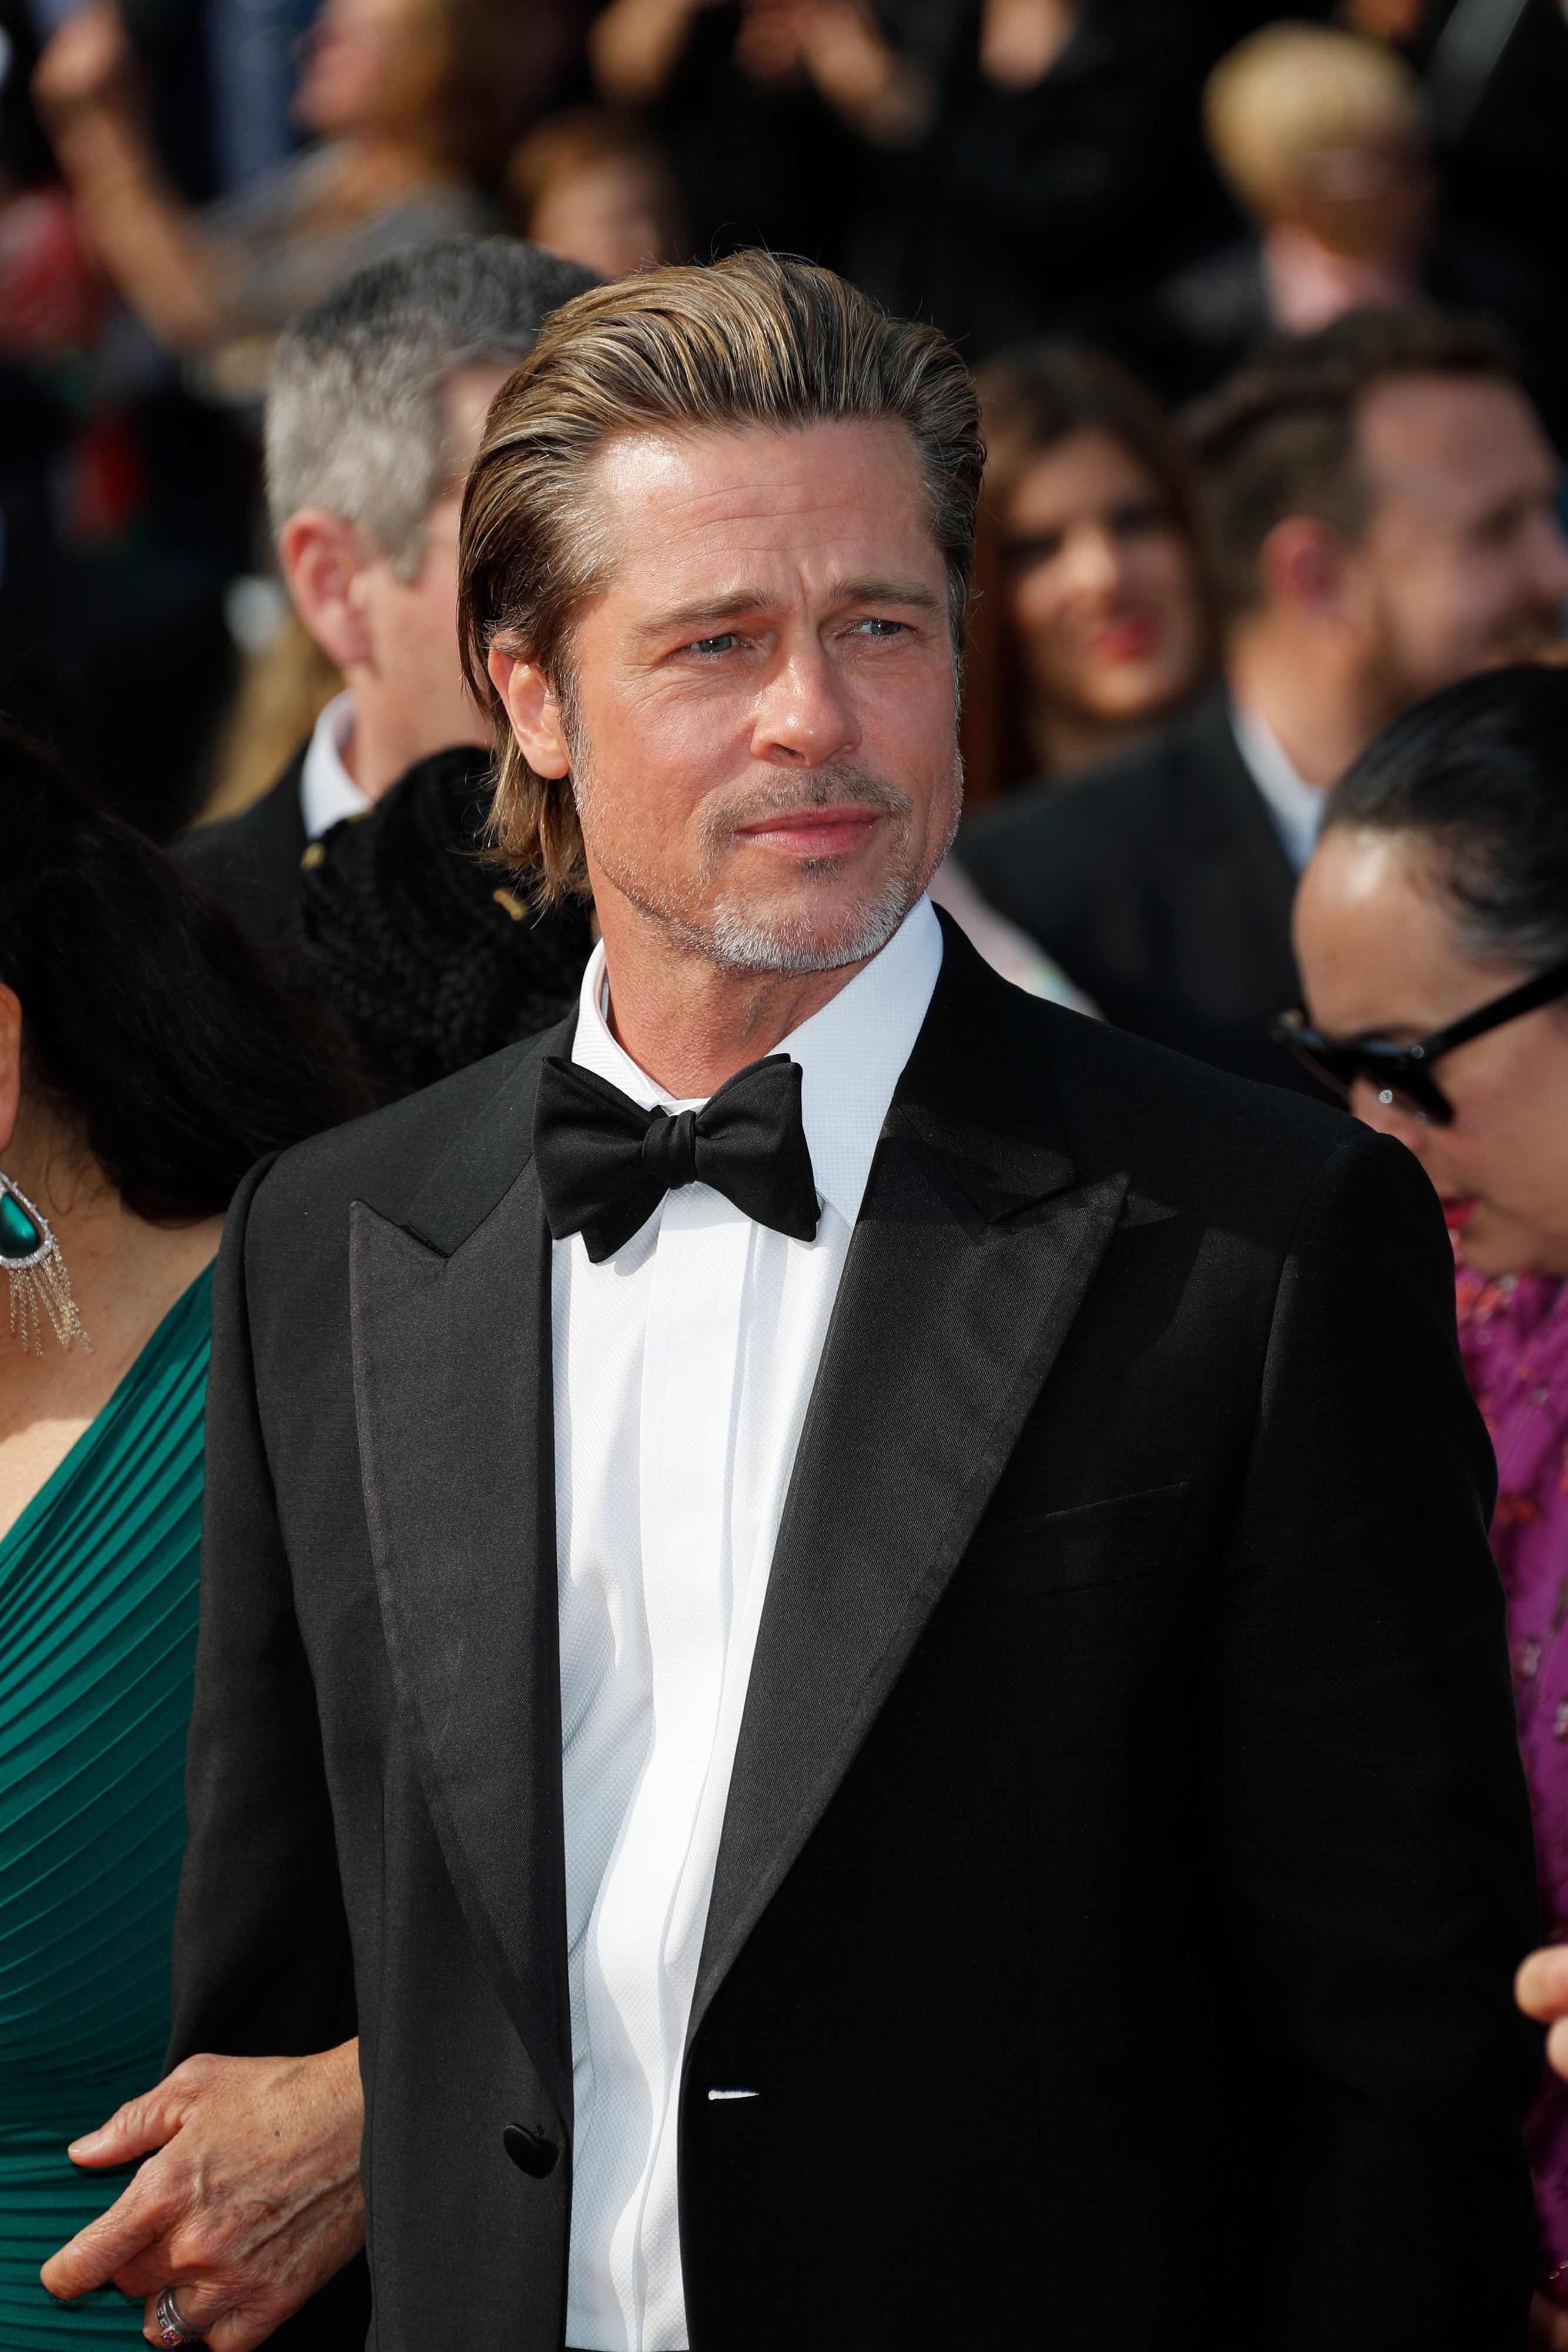 Brad Pitt attends the screening of "Once Upon A Time In Hollywood" during the 72nd annual Cannes Film Festival on May 21, 2019. | Source: Getty Images